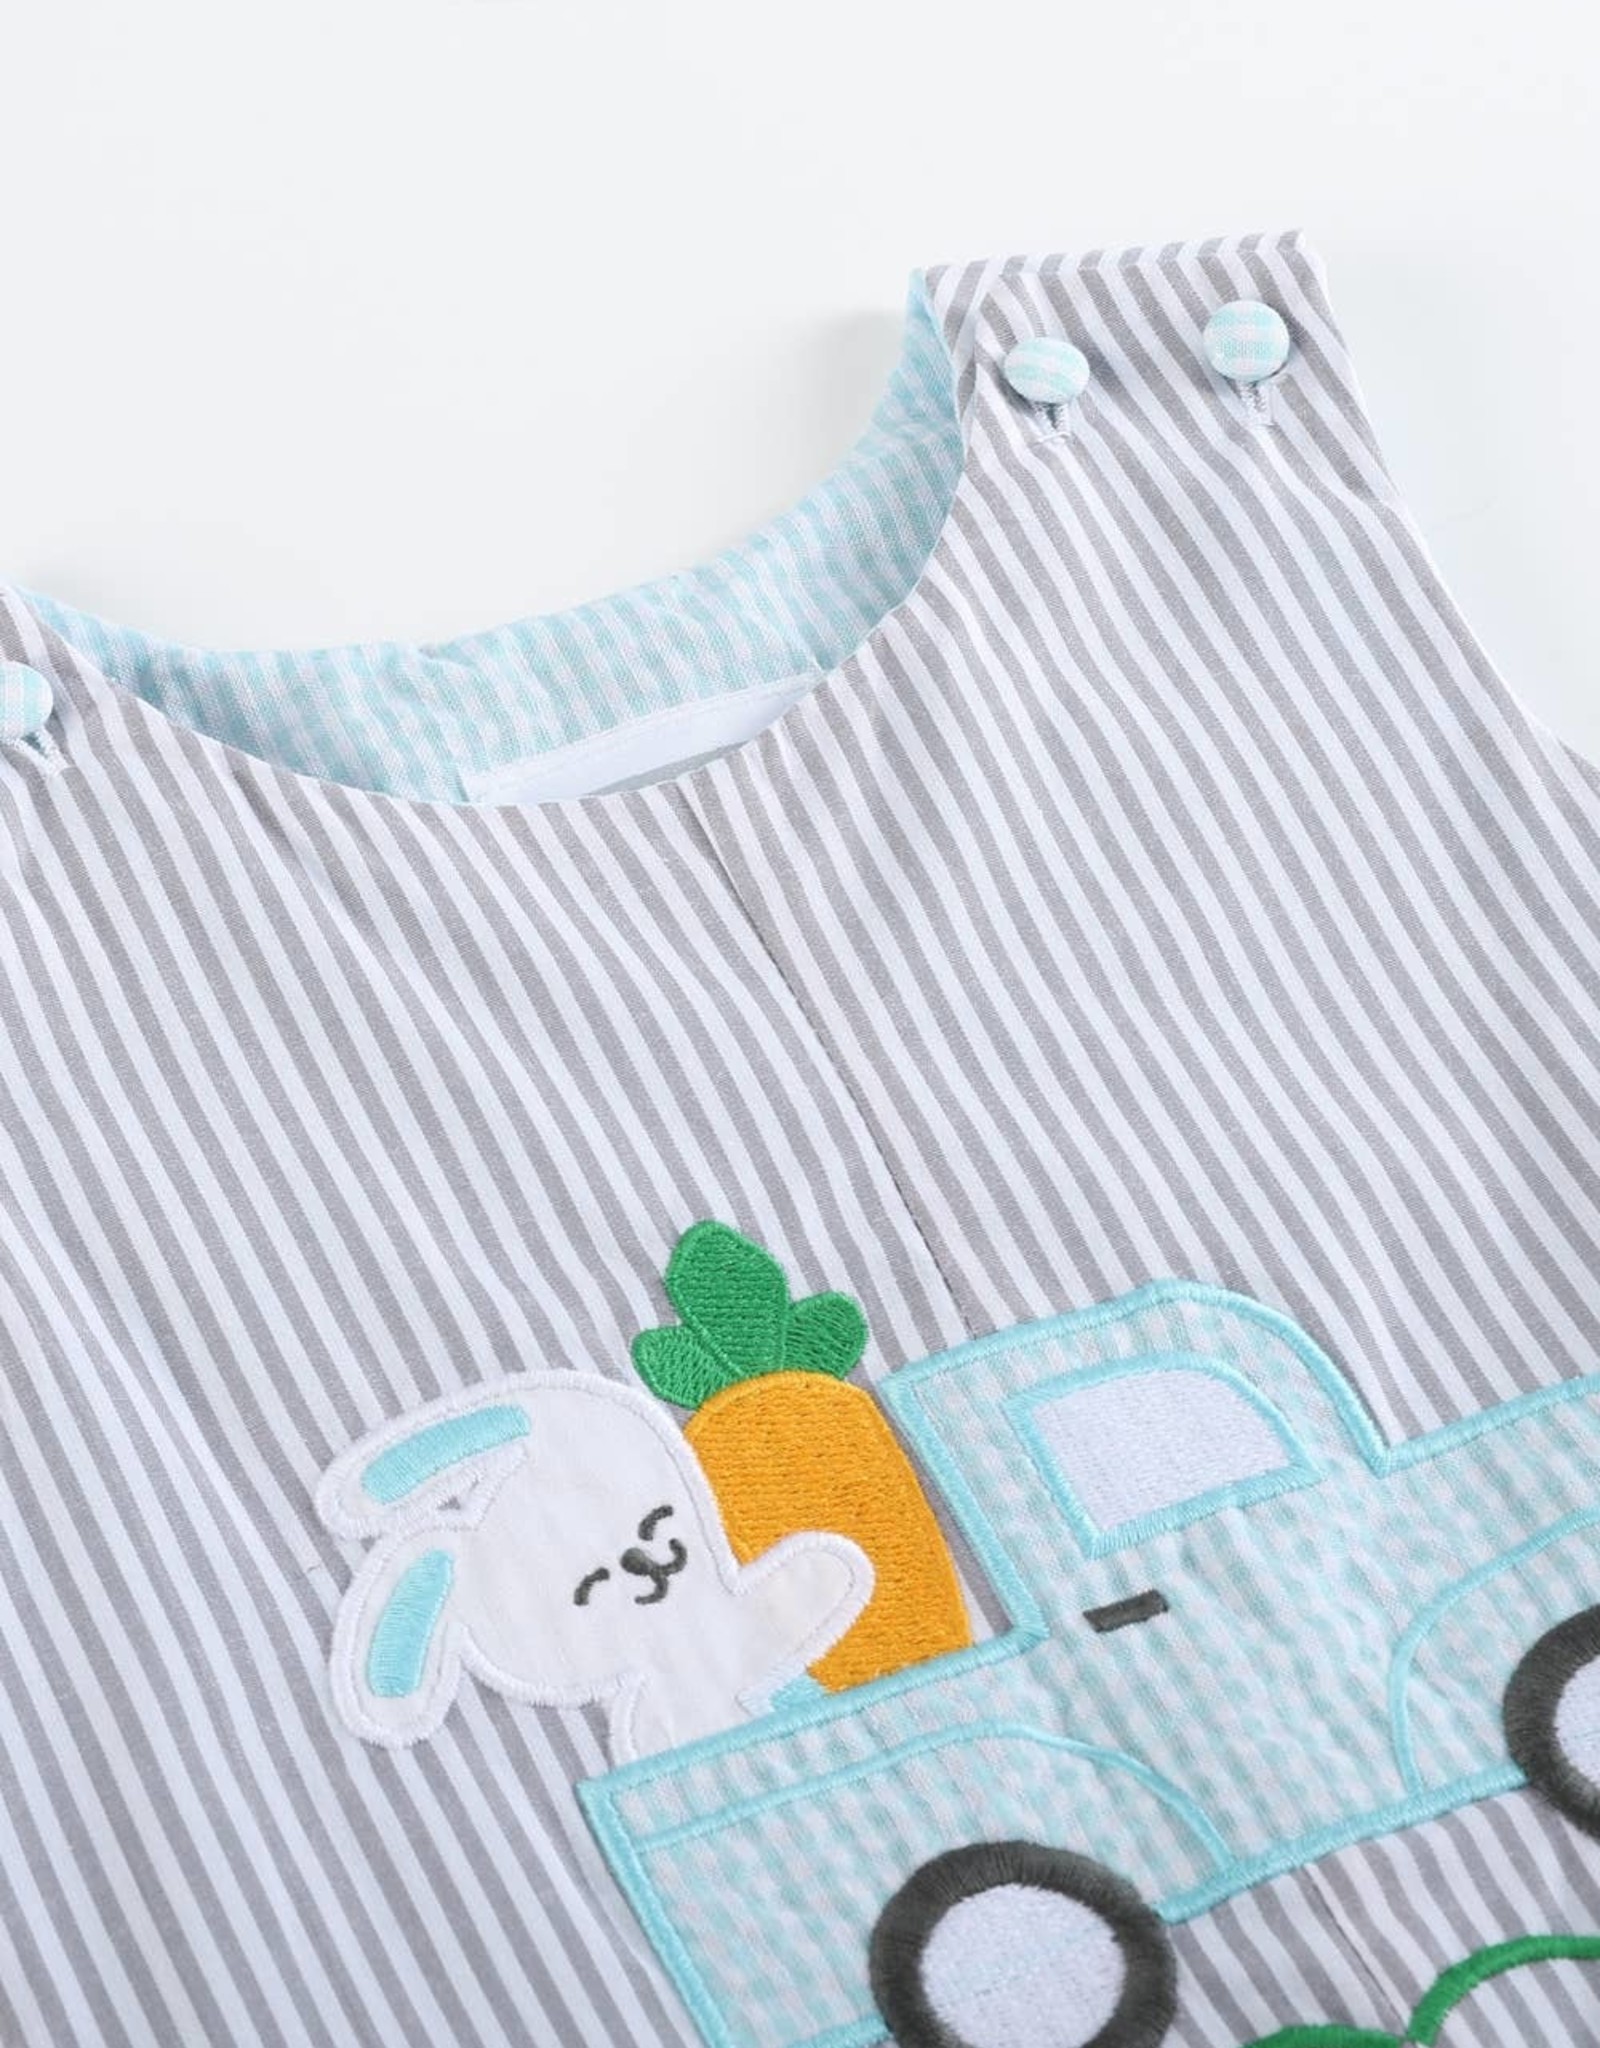 Gray Striped Easter Bunny Truck Applique Overalls